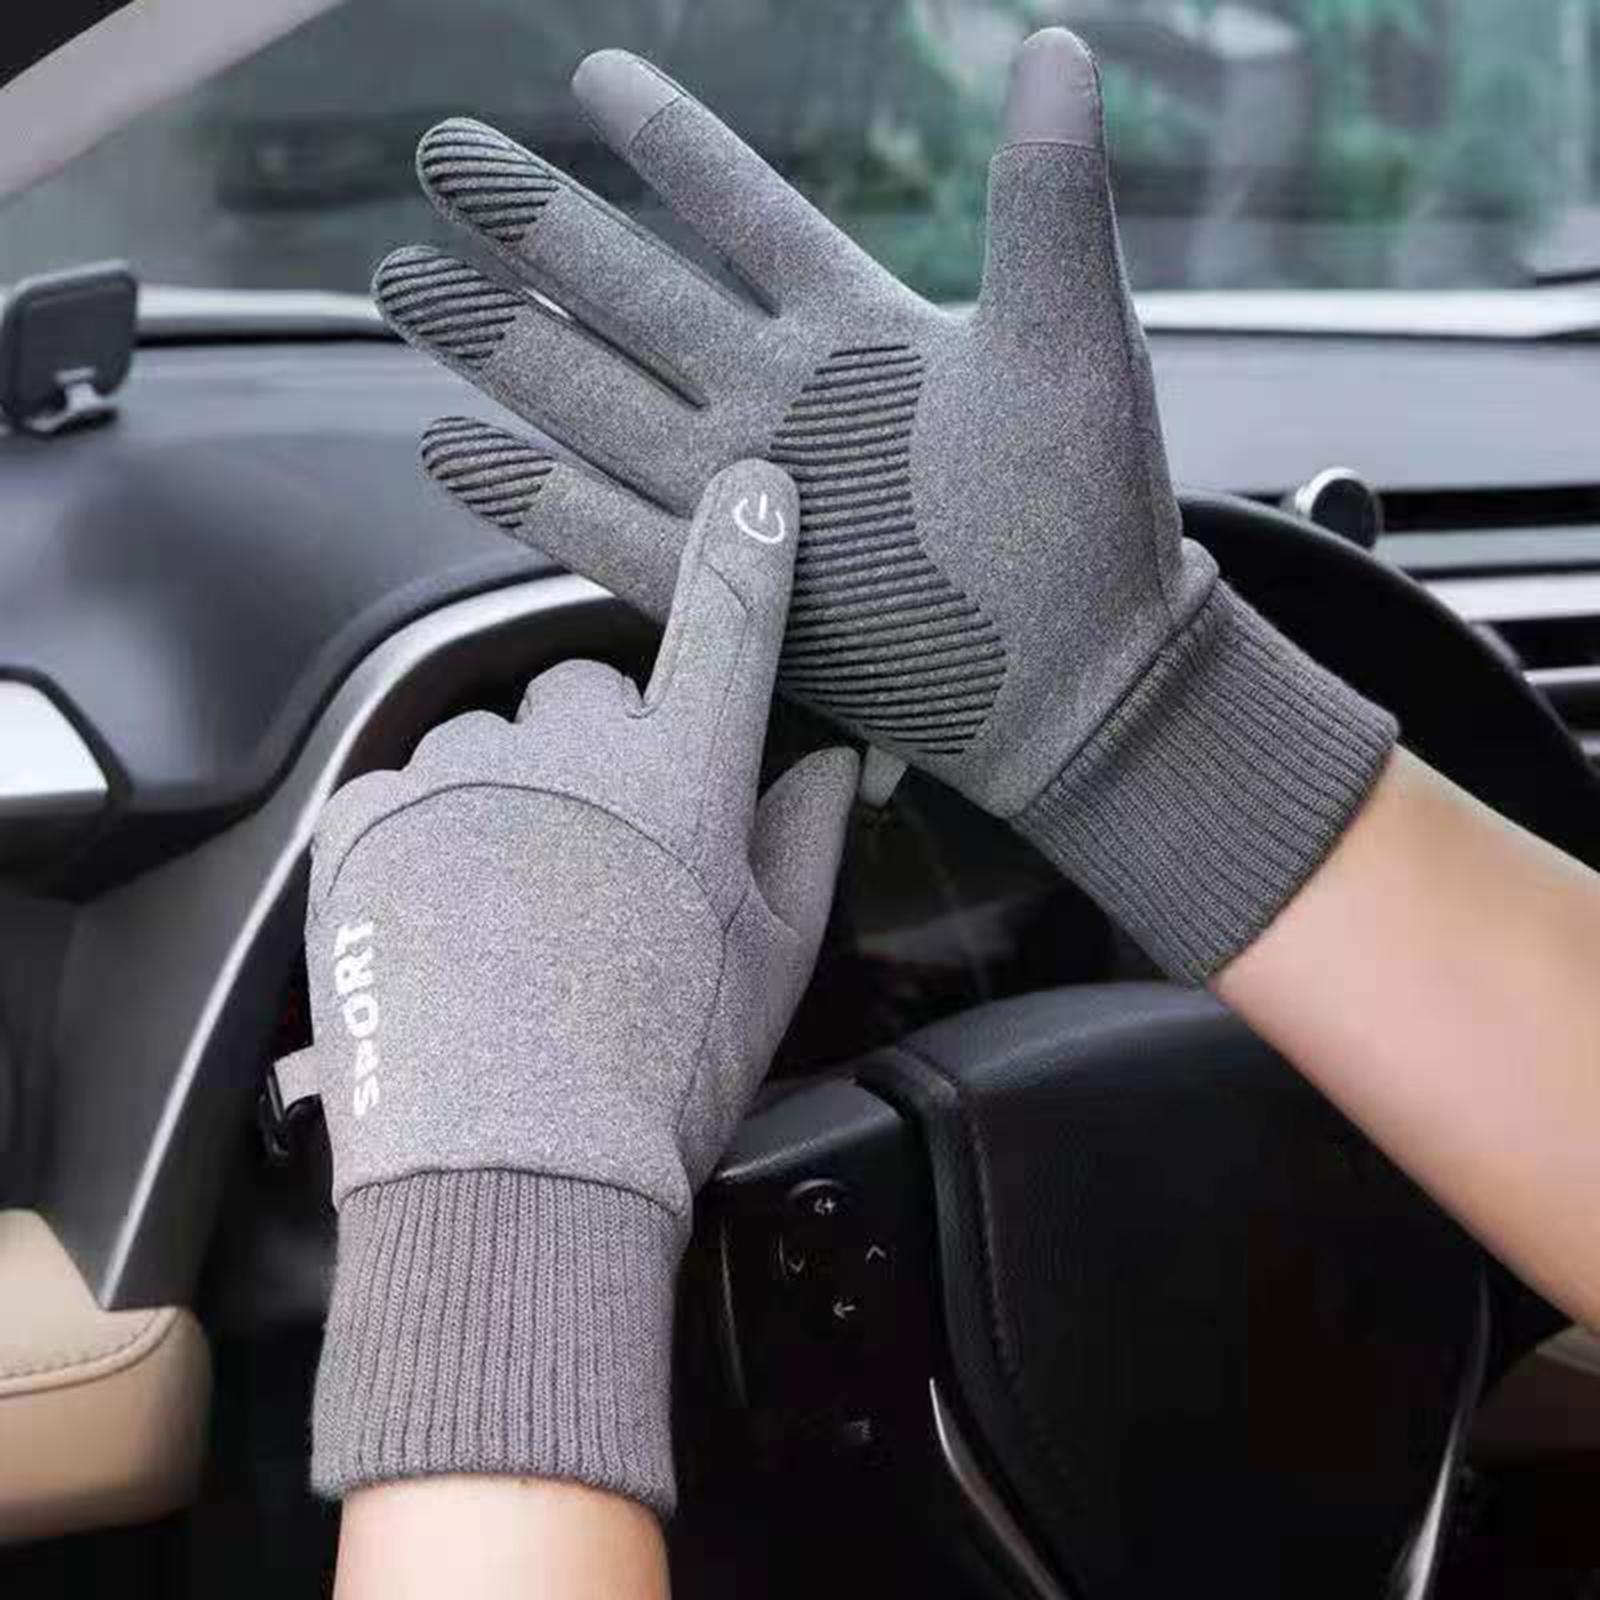 Thermal Gloves Commuting Winter Gloves for Driving Outdoor Sports Riding Light Gray Medium